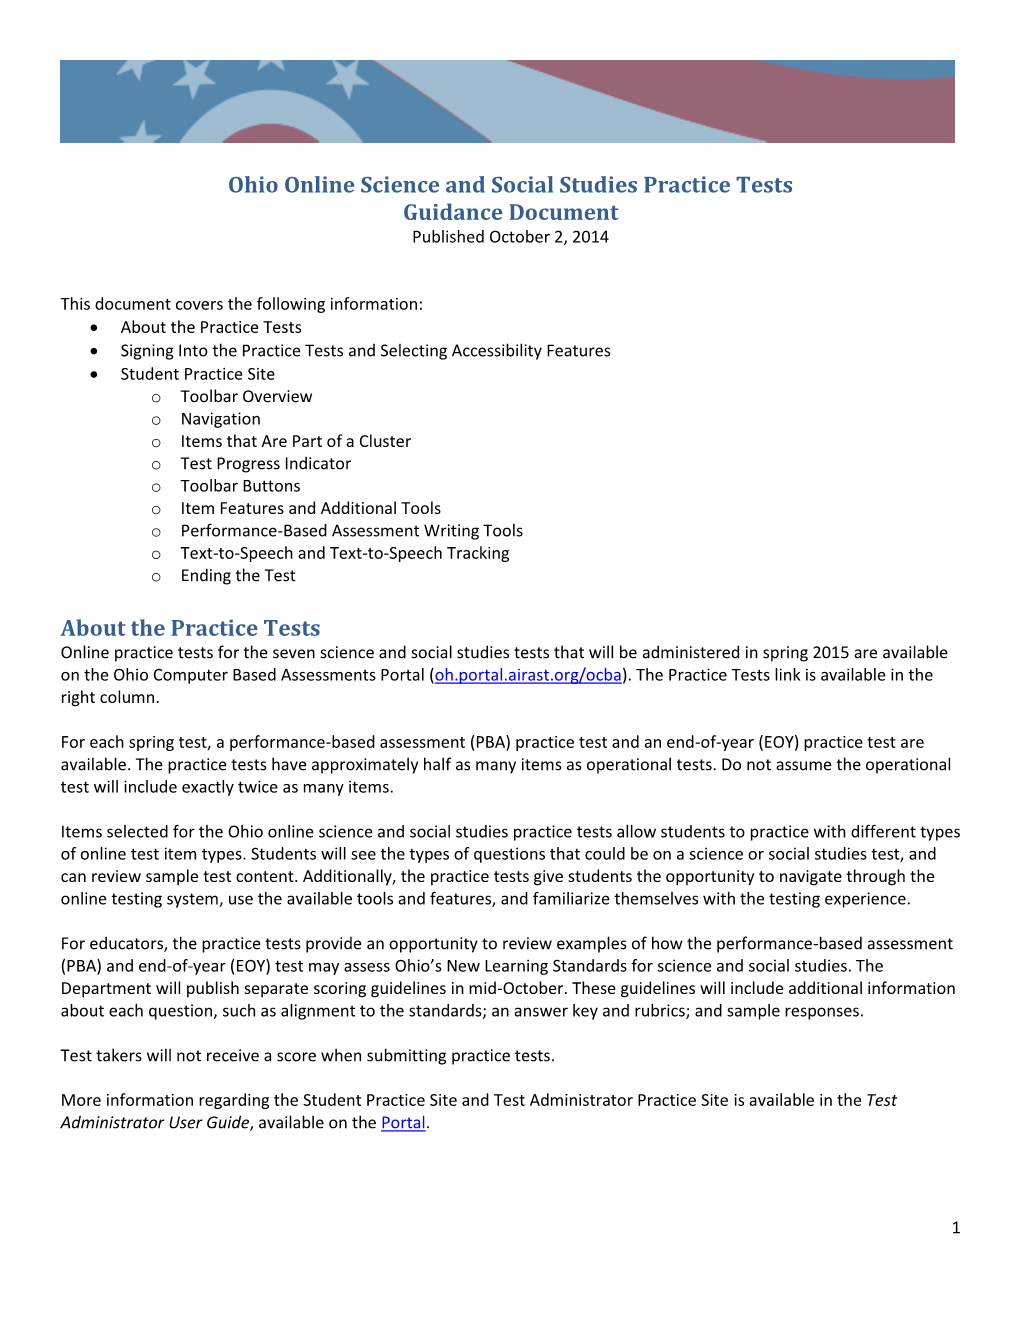 Ohio Online Science and Social Studies Practice Tests Guidance Document Published October 2, 2014